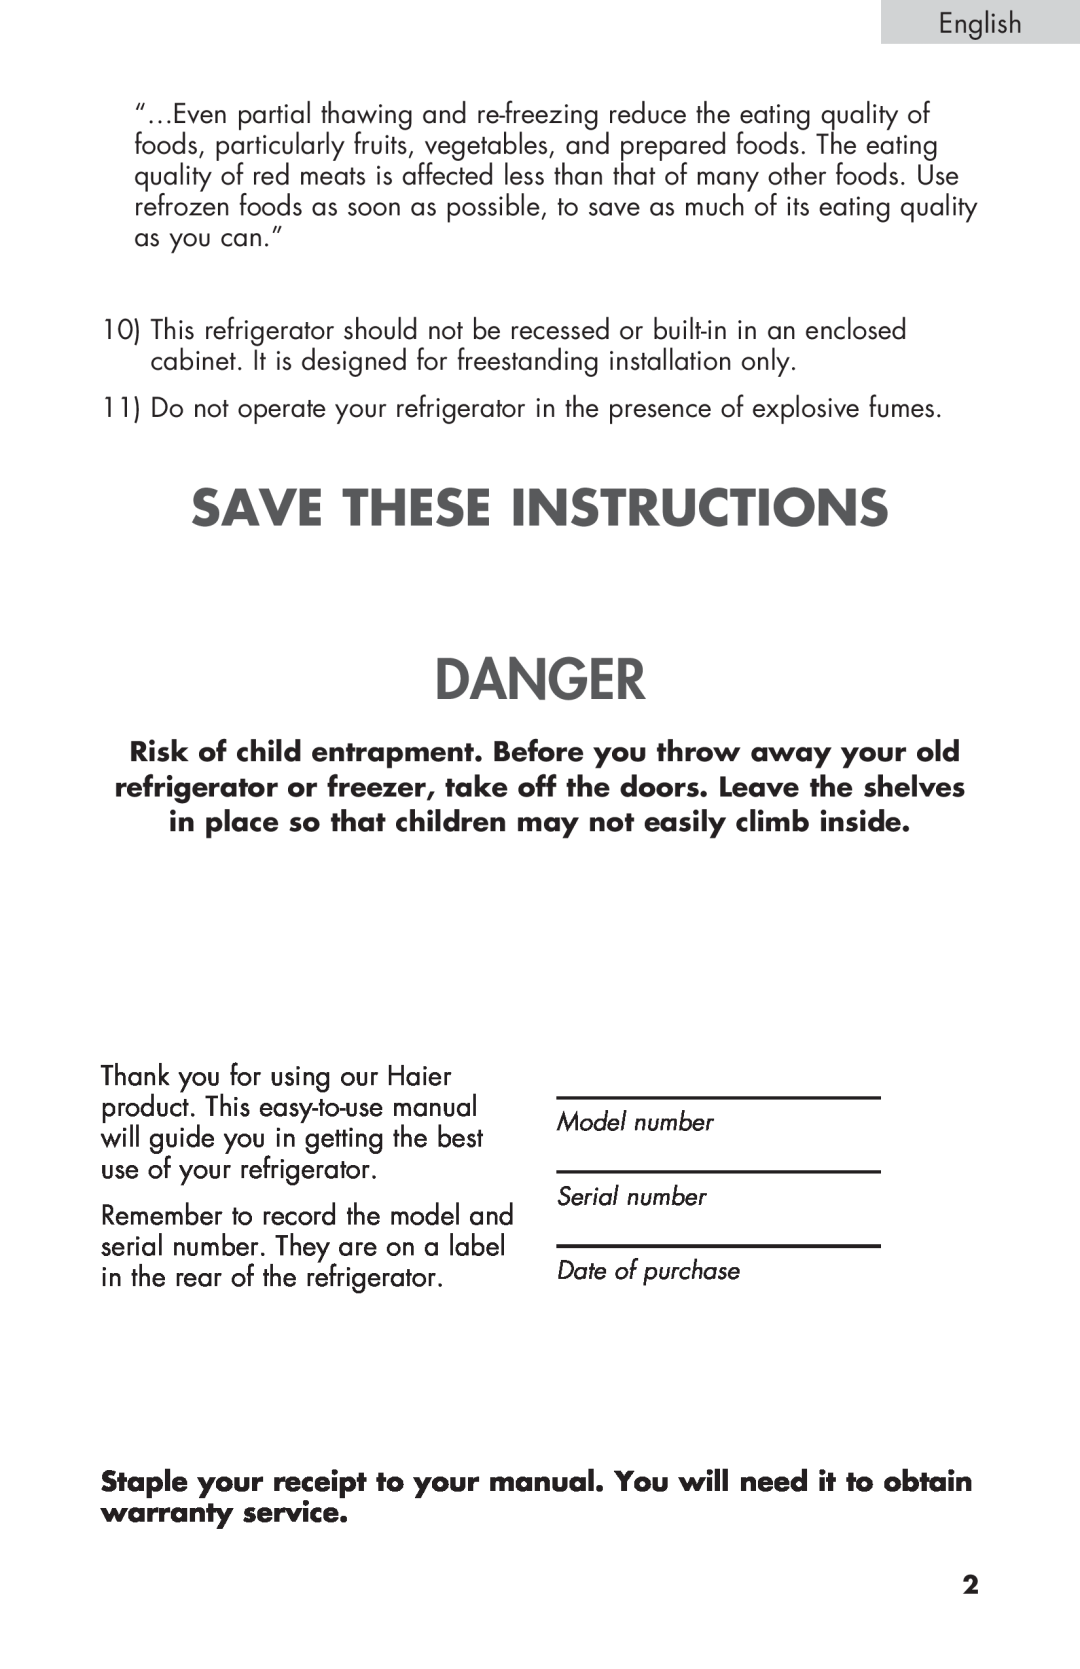 Haier HNSEW025 user manual Save These Instructions, Danger 